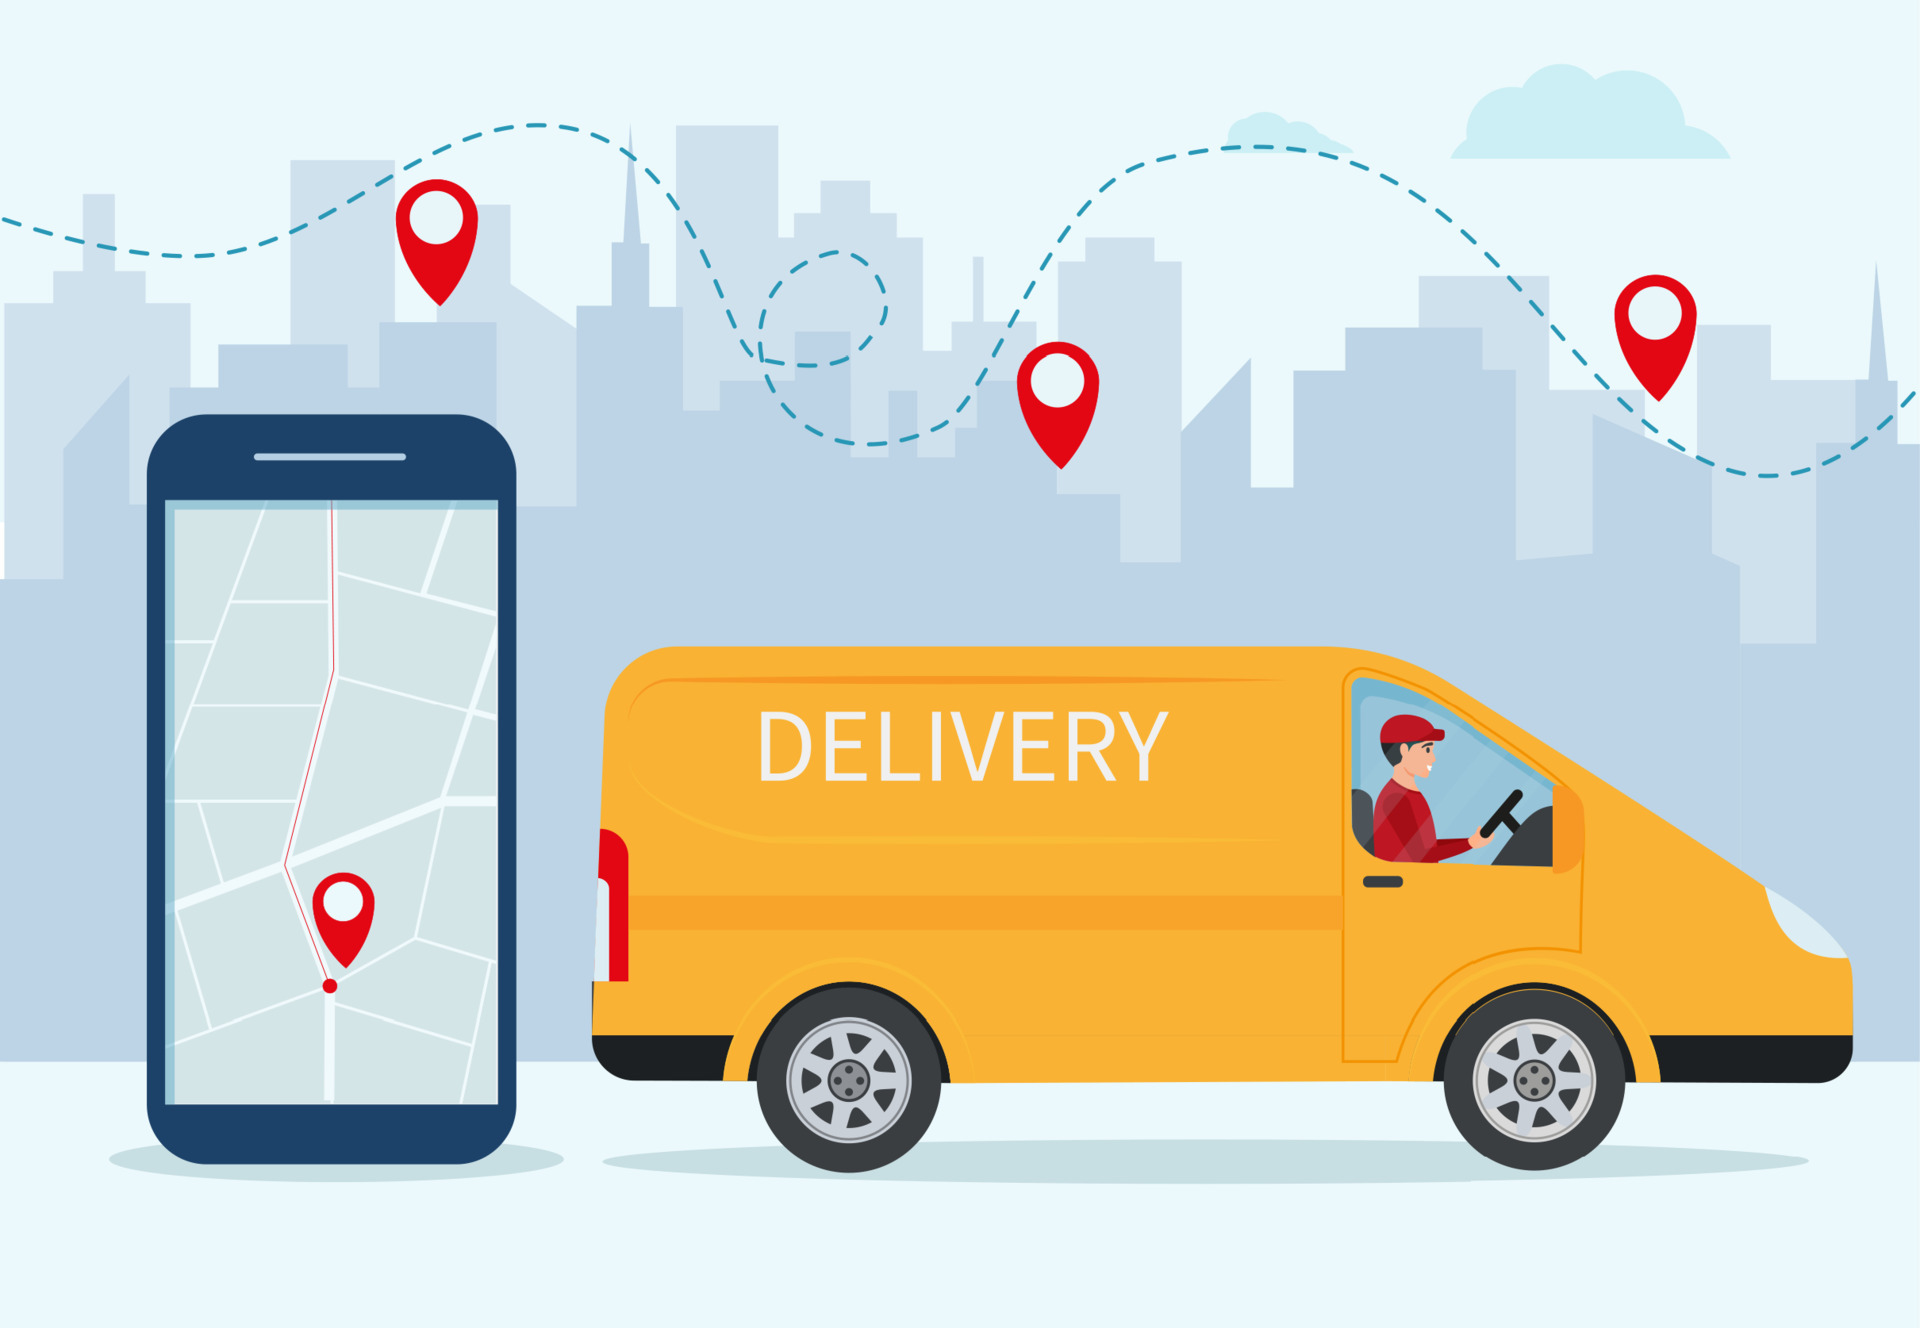 Free, Express, Home or Fast delivery service by van. Car with stack of ...